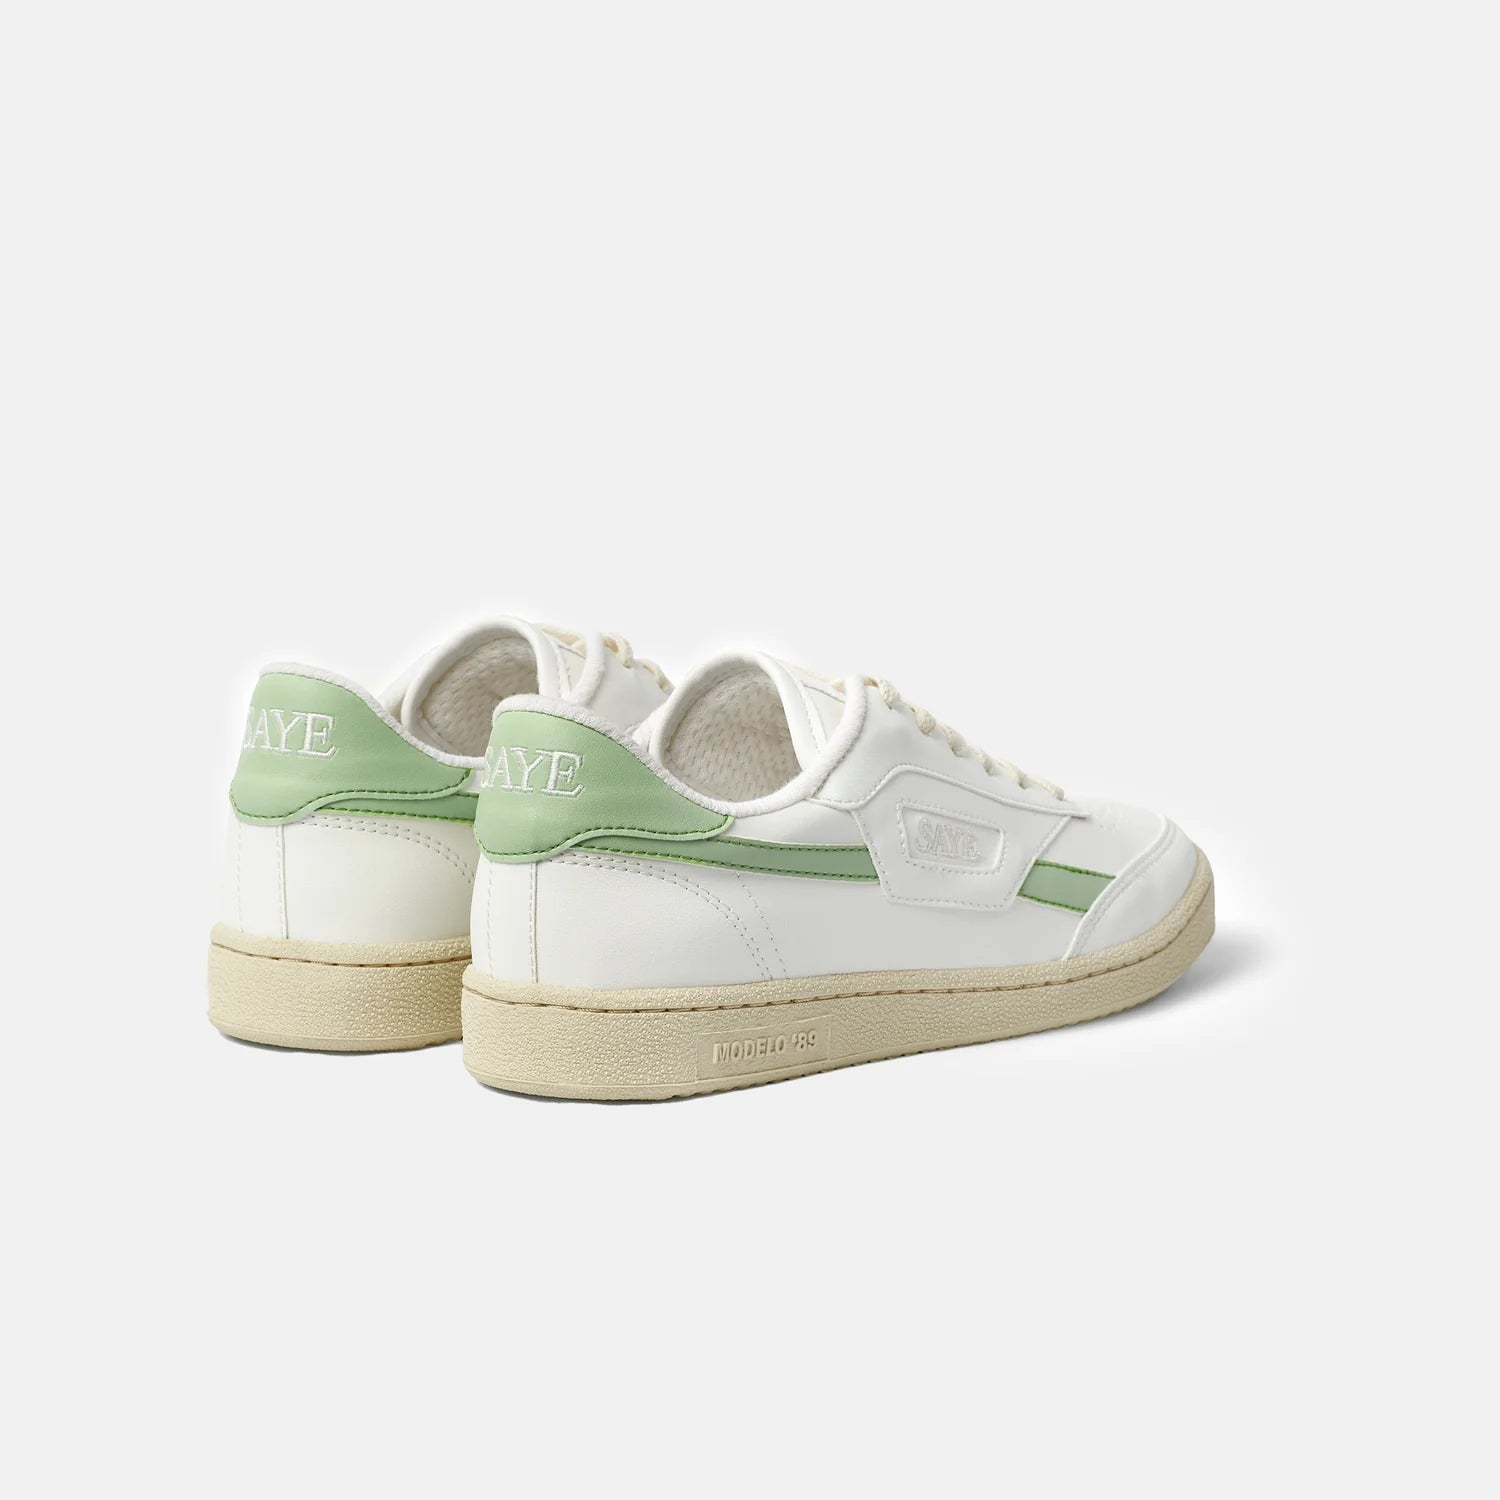 Off white trainers with lime green side detail